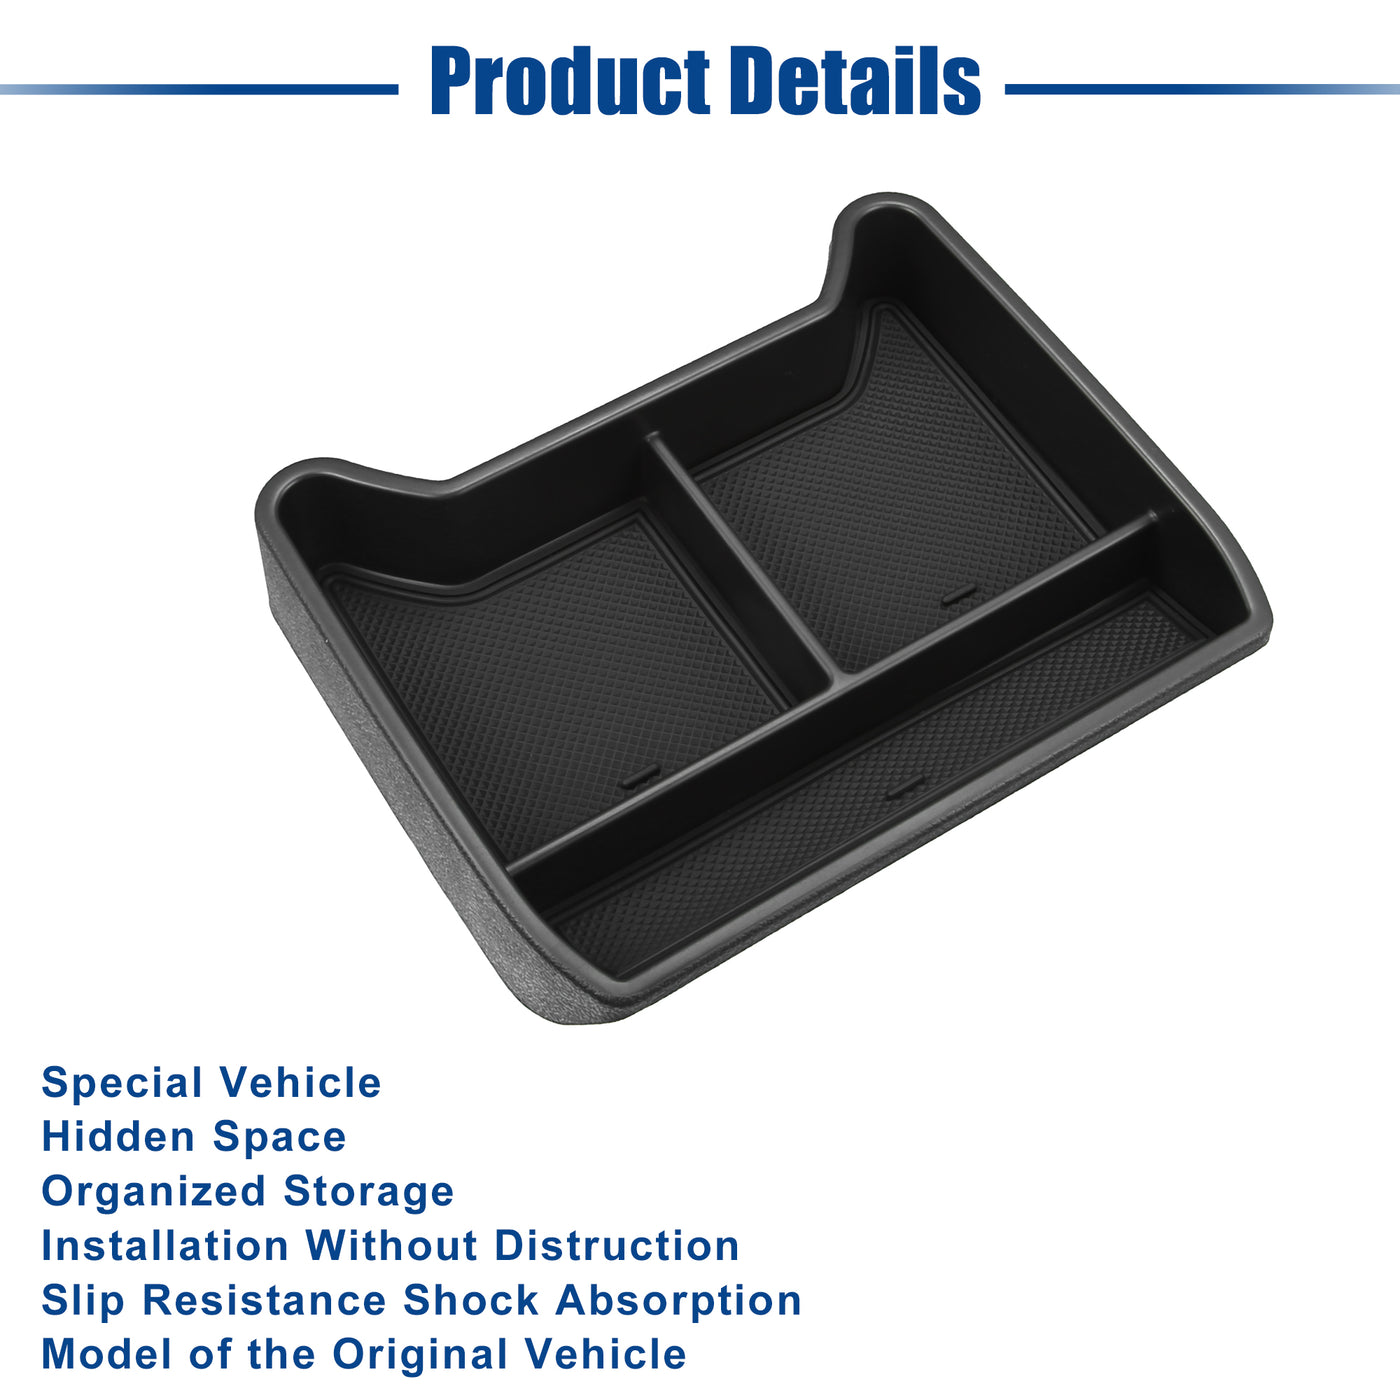 ACROPIX Front Center Console Organizer Tray Fit for VW ID.4 2021 - 2023 - Pack of 1 Black